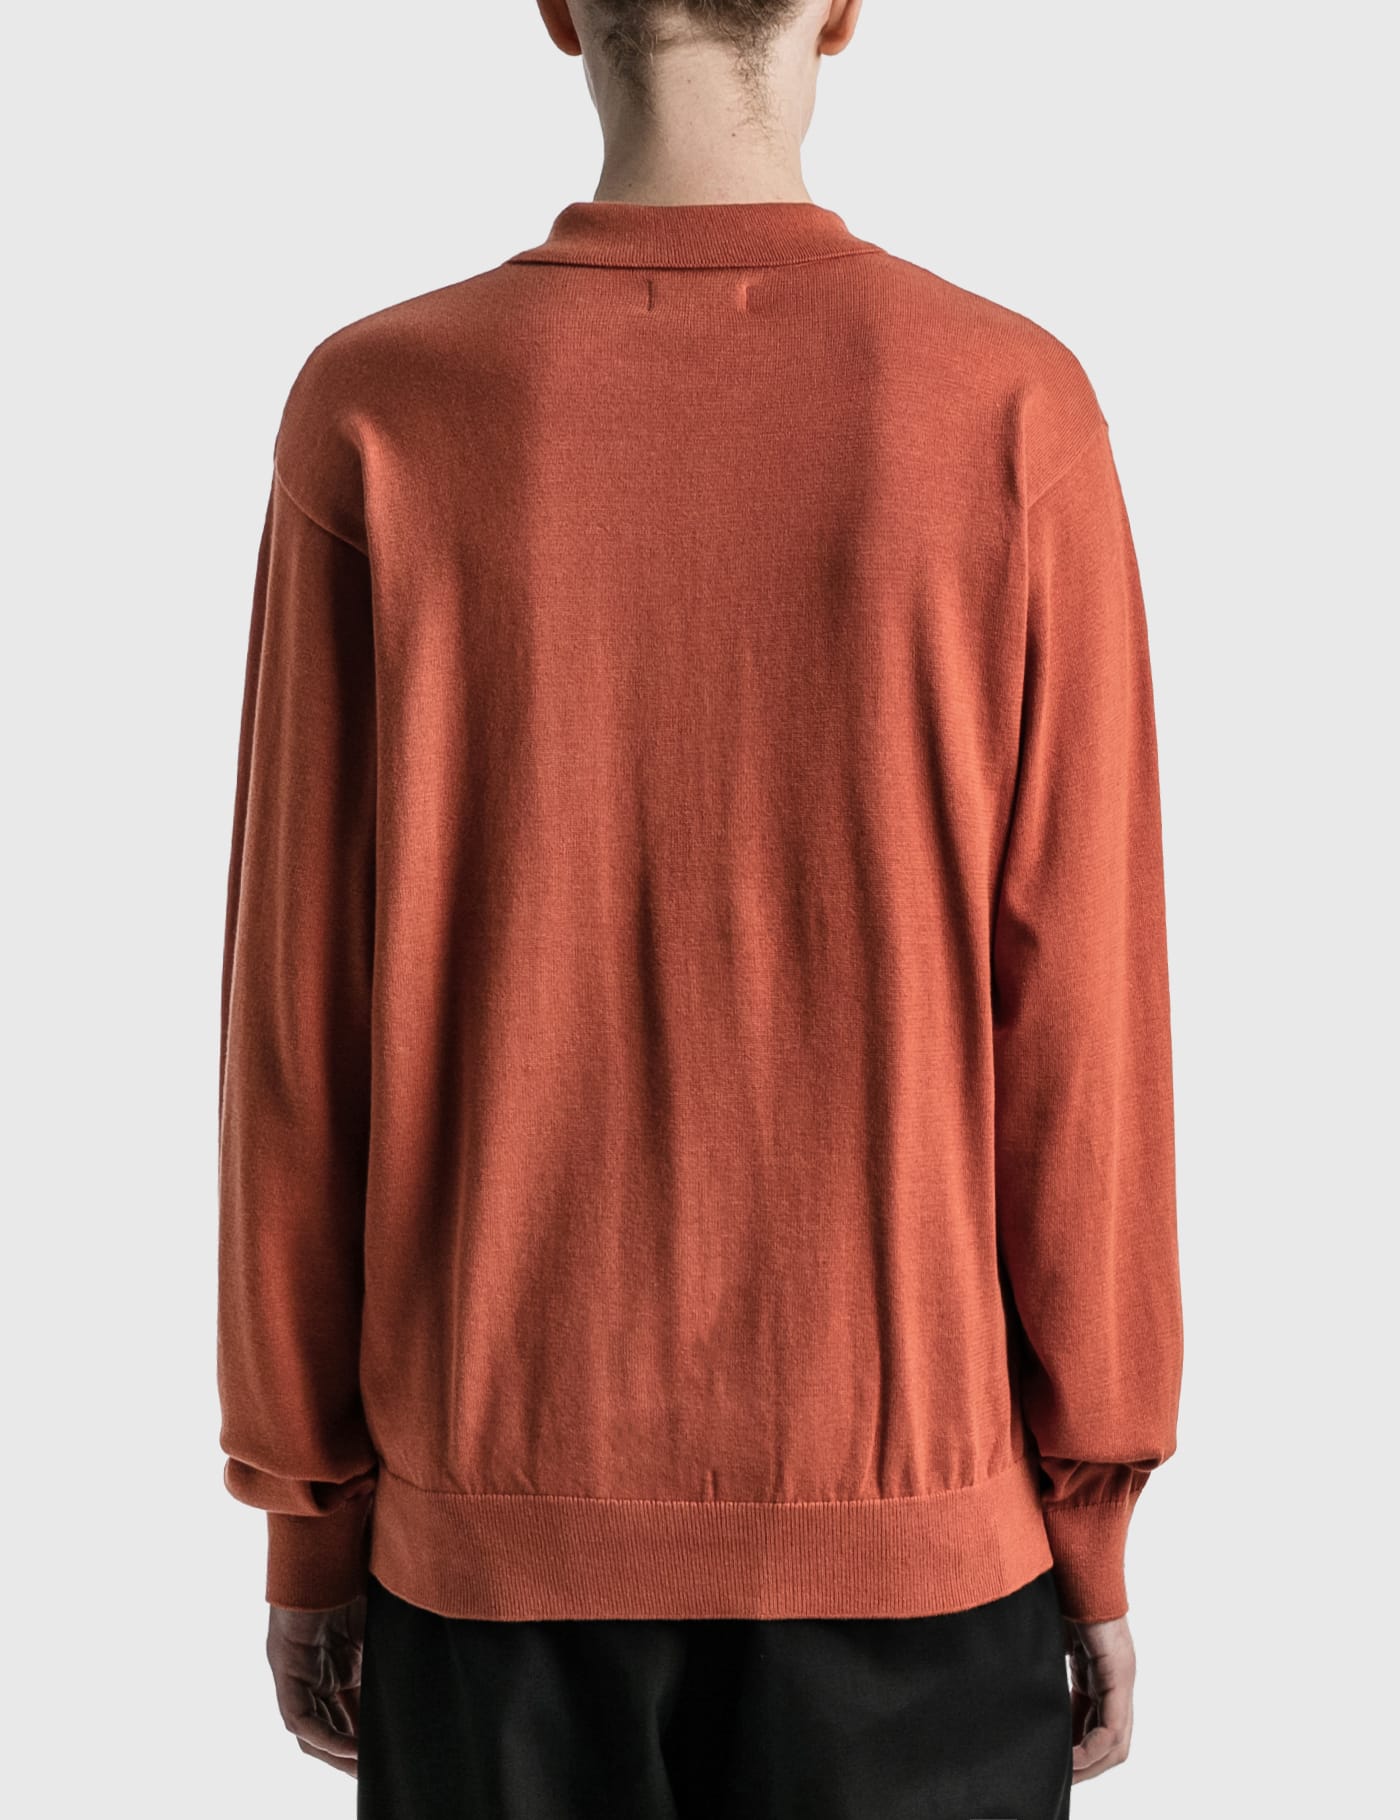 Stüssy - Color Block Sweater | HBX - Globally Curated Fashion and 